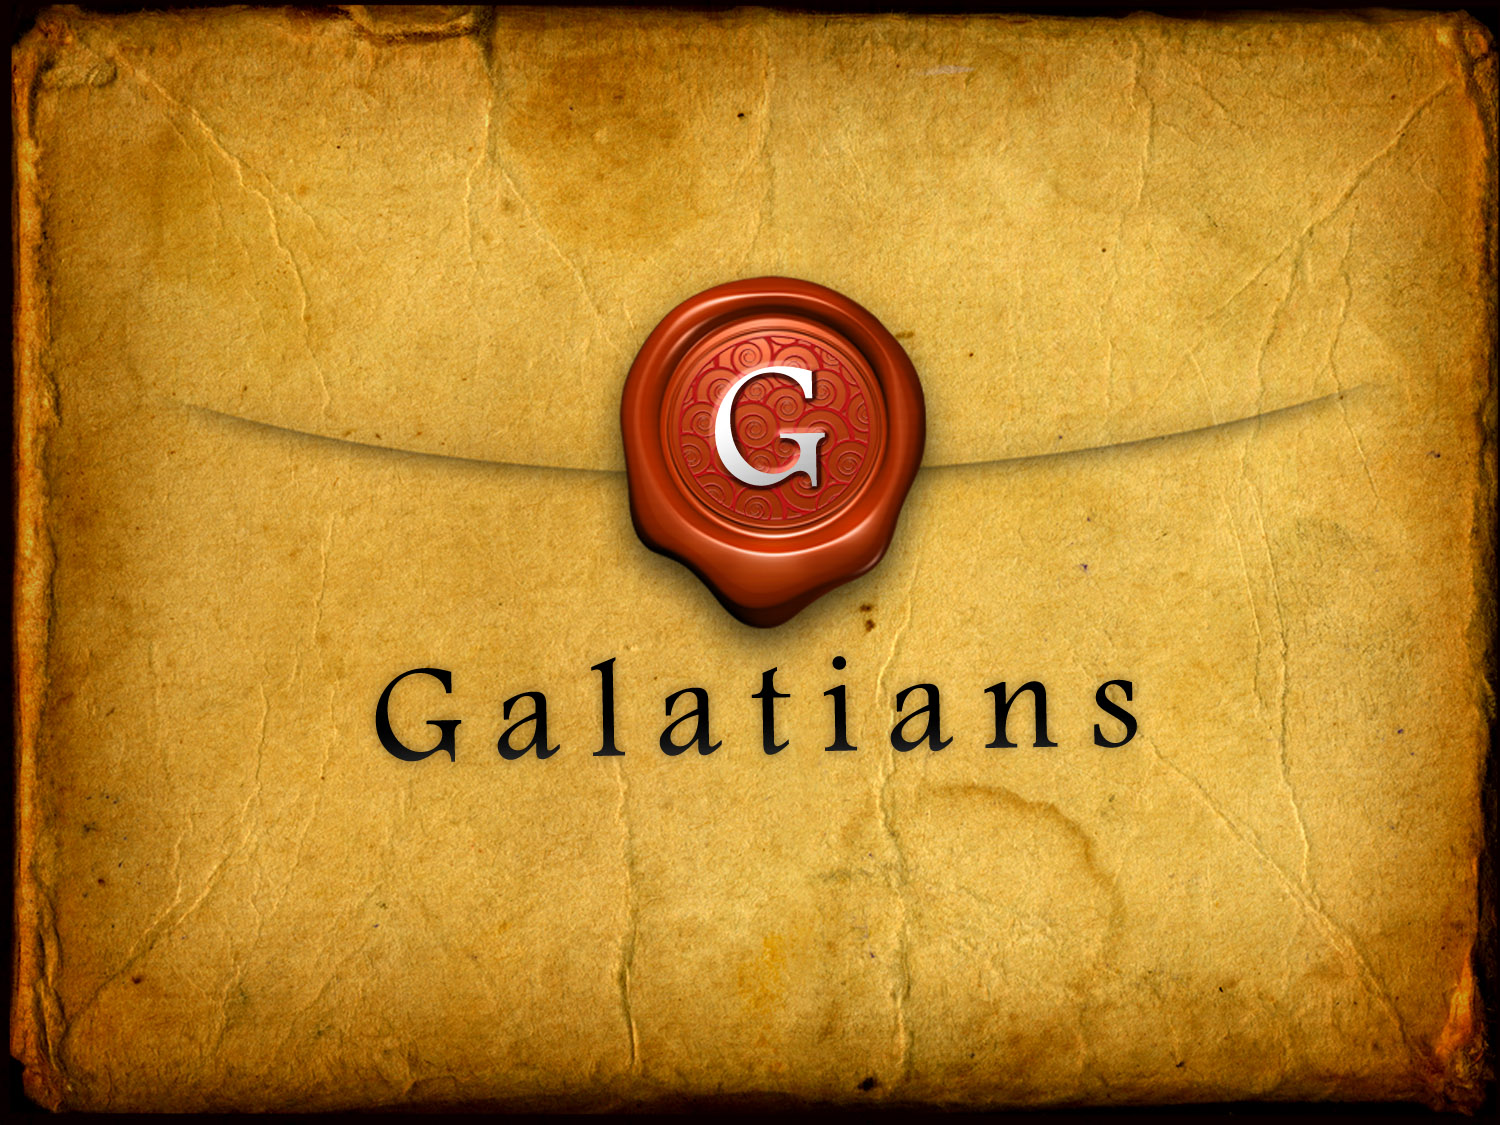 The Book of Galatians 4:1-7